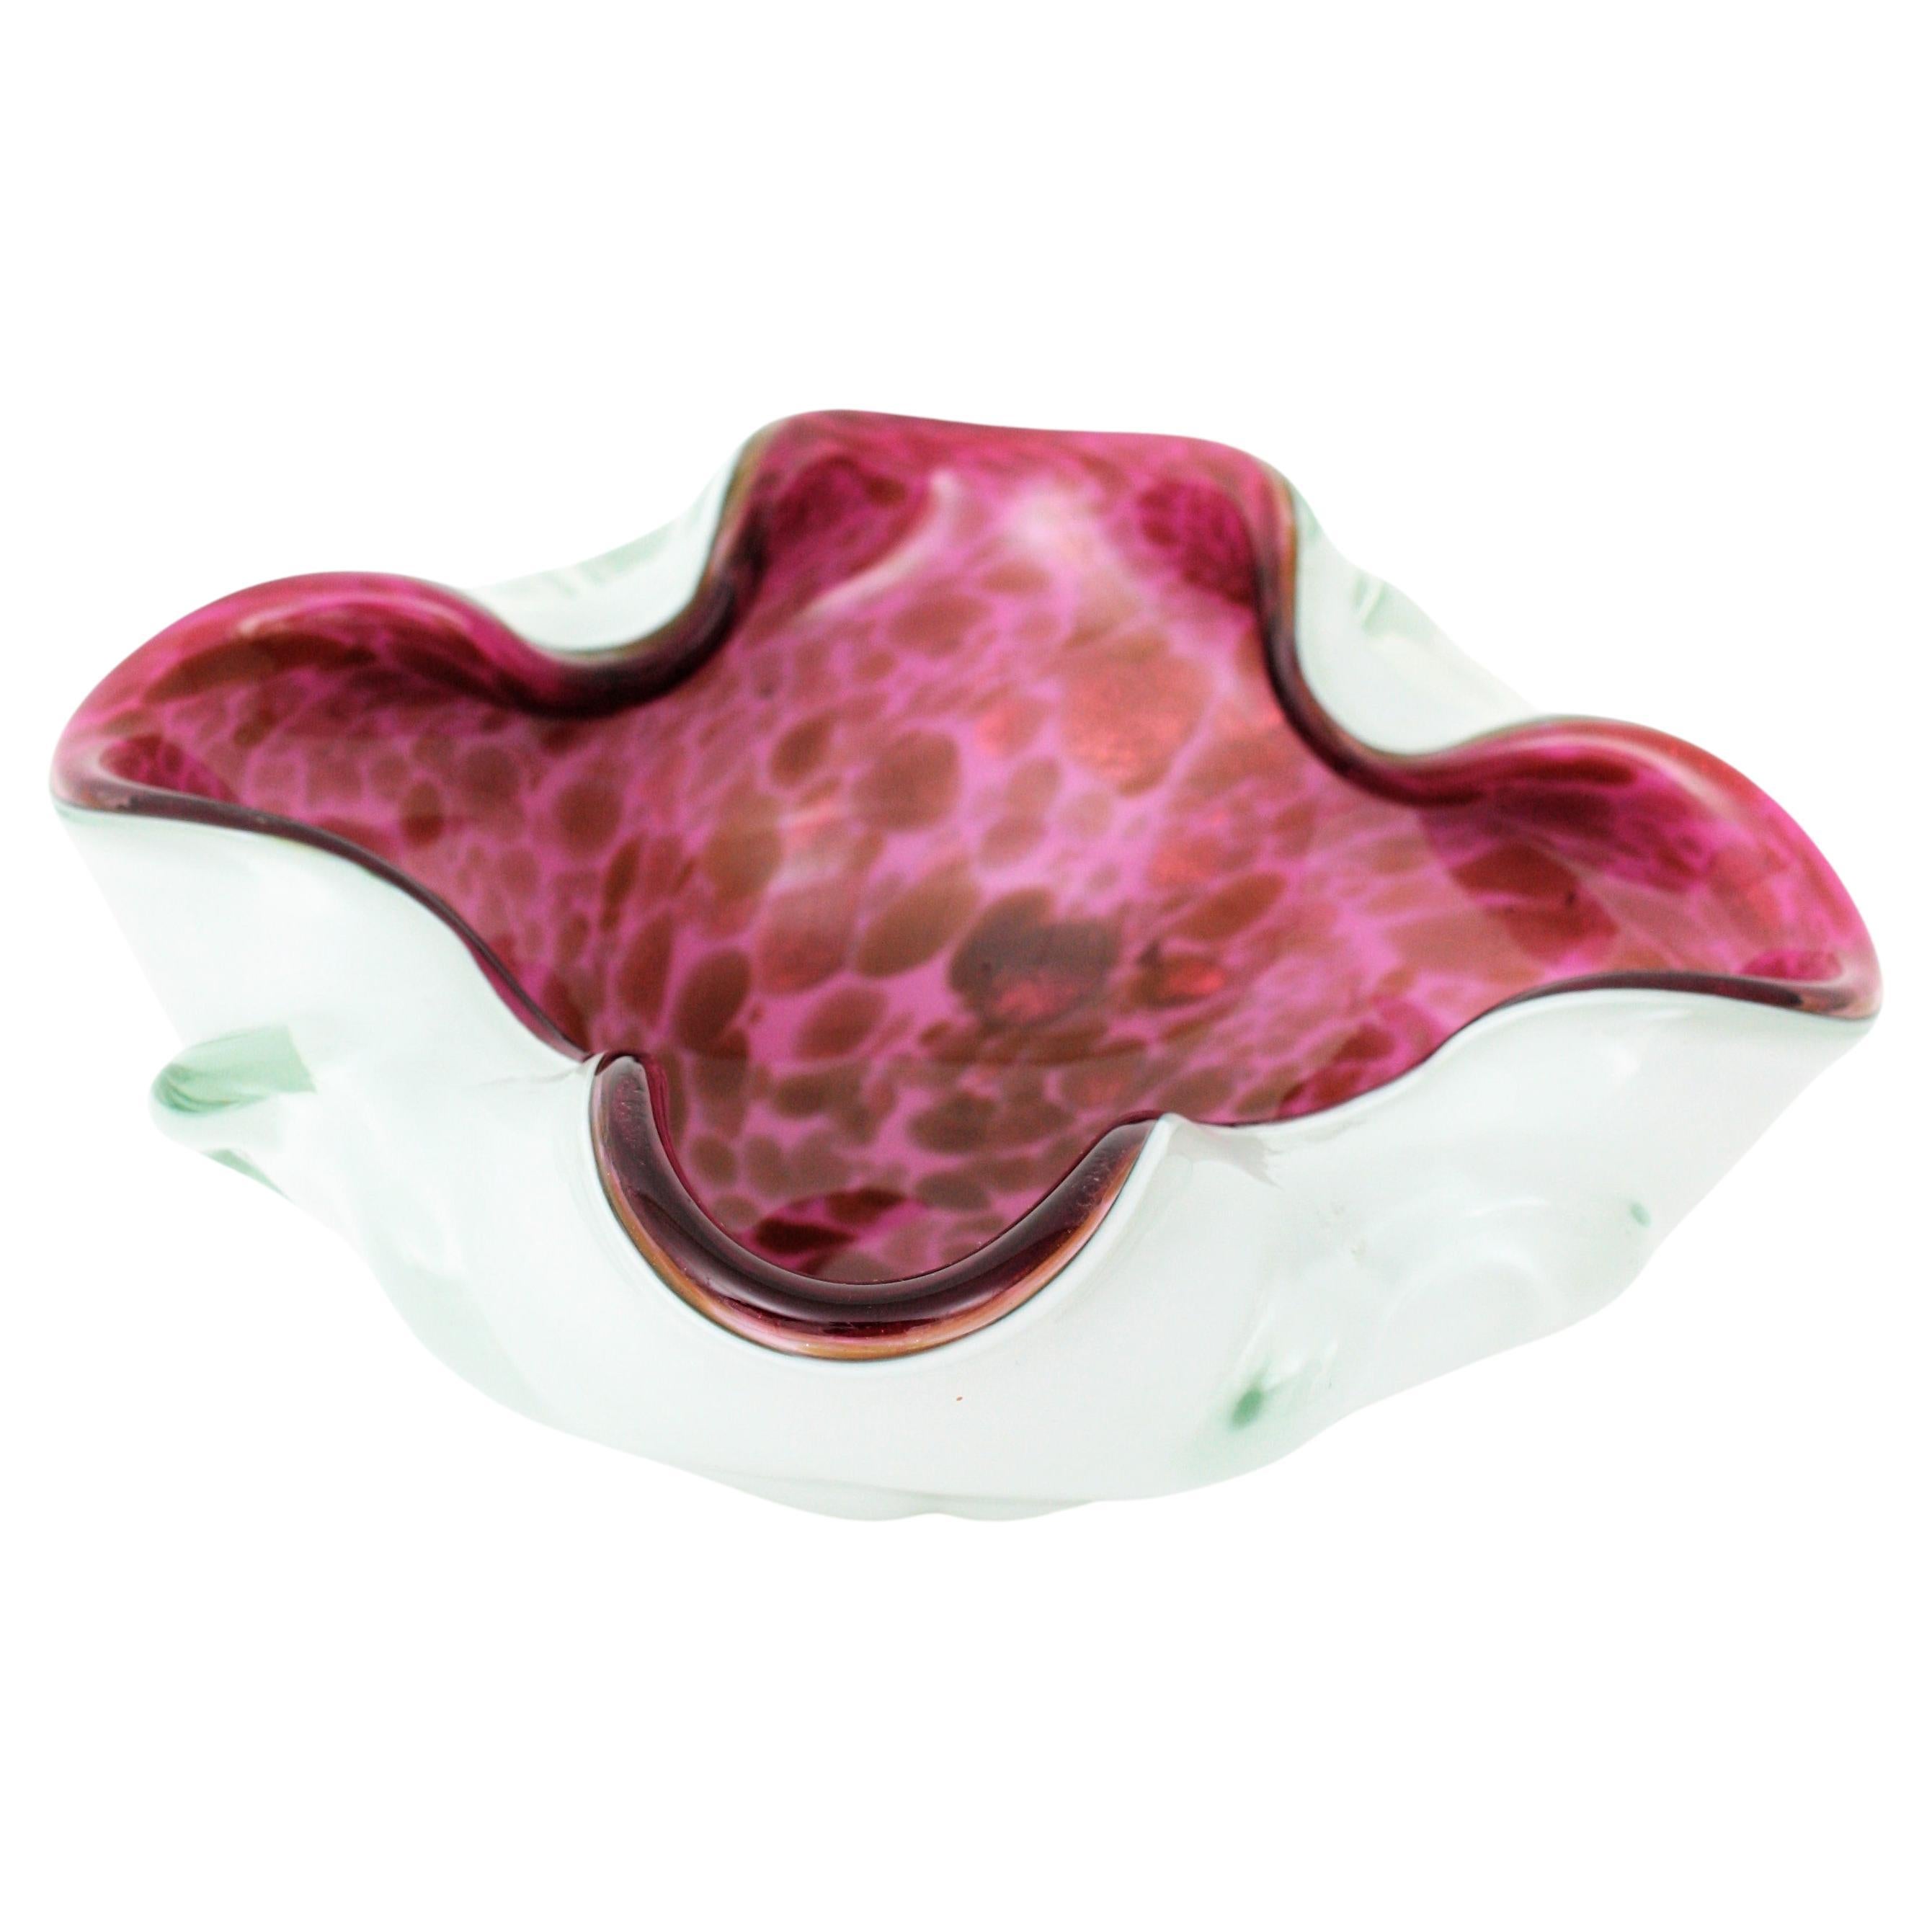 Midcentury Murano Glass Bowl with Aventurine Flecks. Attributed to Fratelli Toso.  Italy, 1950-1960s.
Beautiful handblown pink, purple and white with copper aventurine flecks spotted Italian art glass flower shaped bowl or ashtray. This free-form